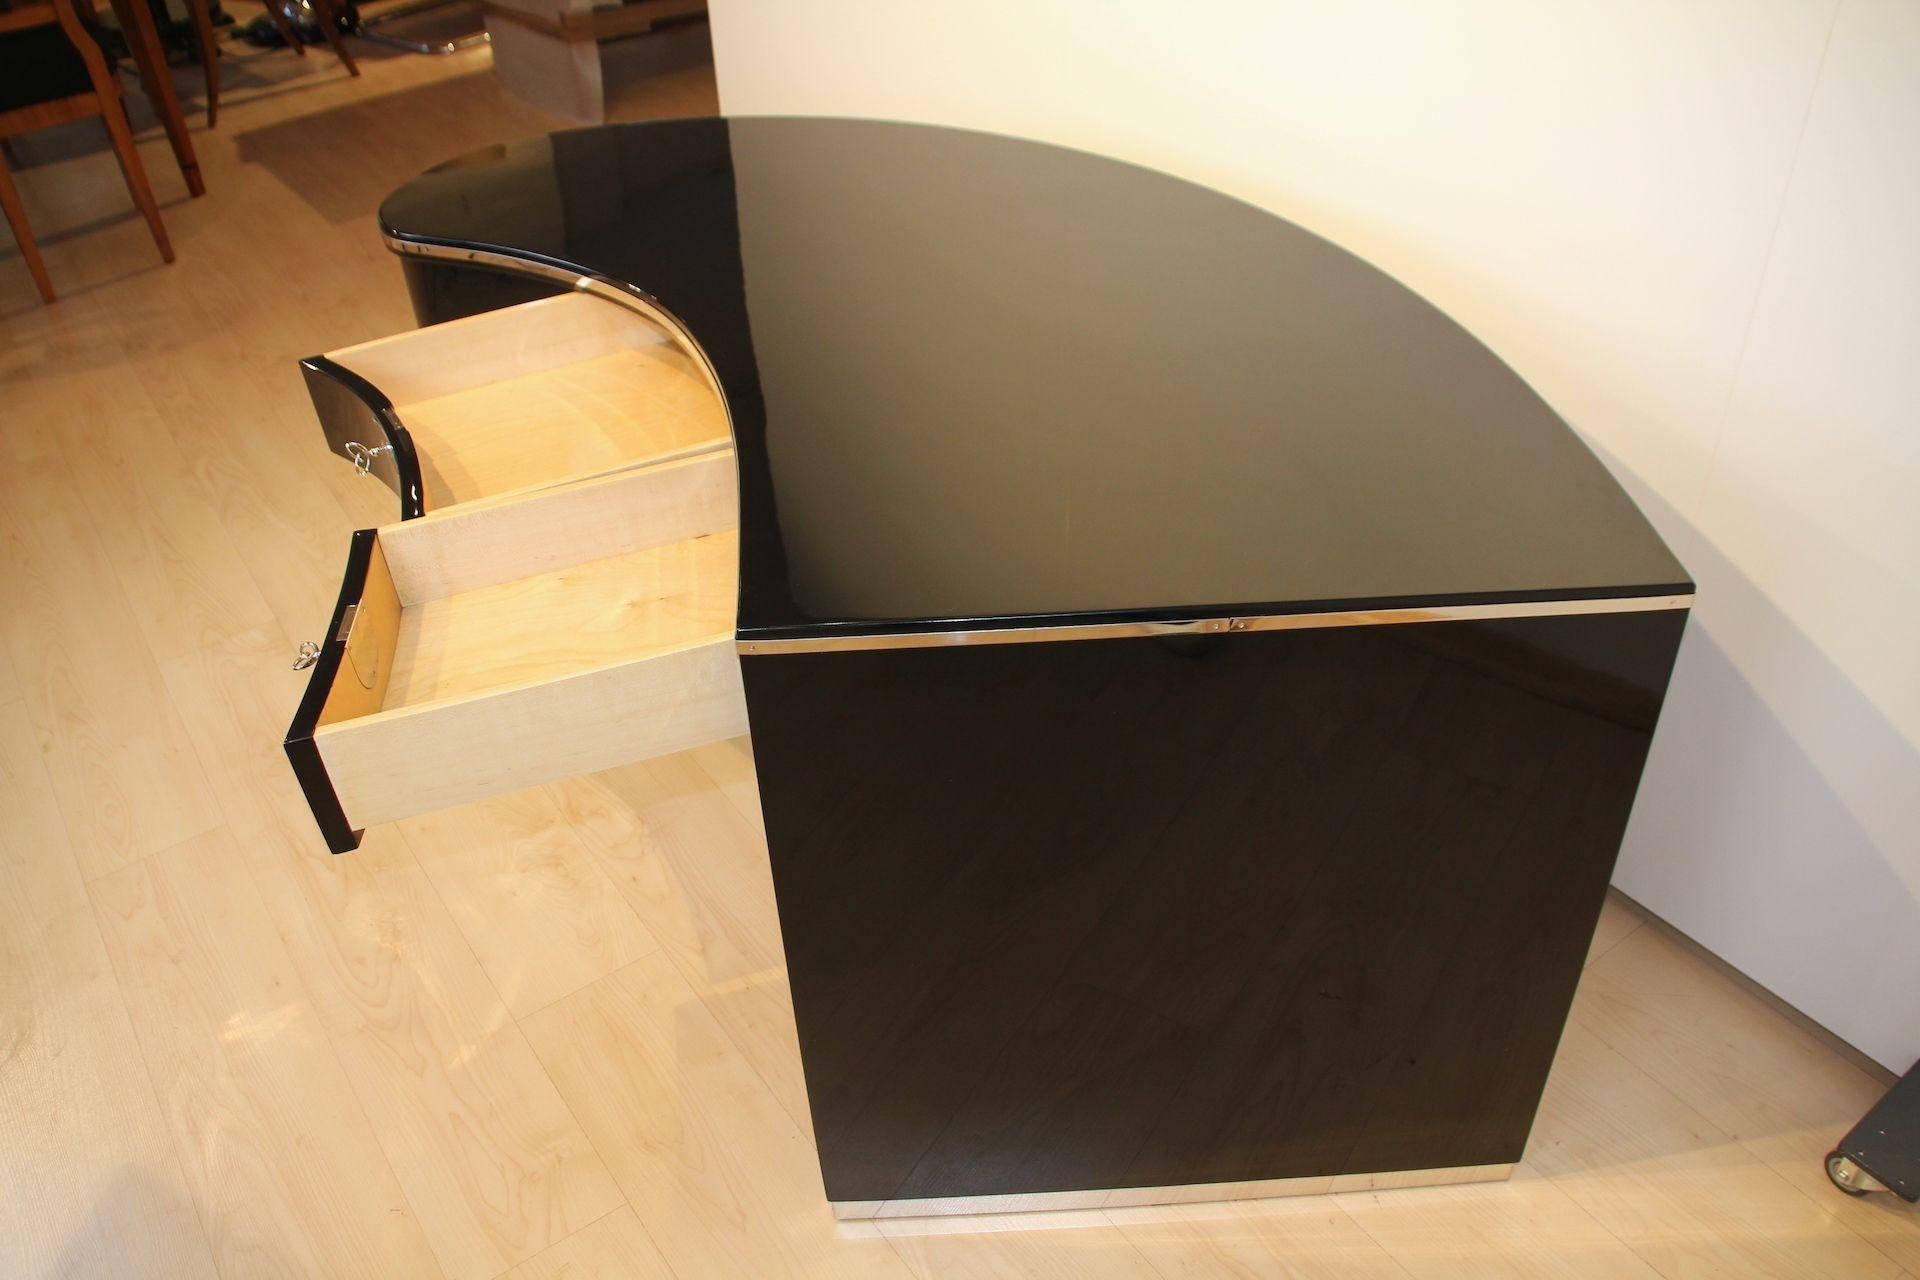 Design Desk, Curved Top, Piano Lacquer, Chrome, France, 1950s For Sale 4